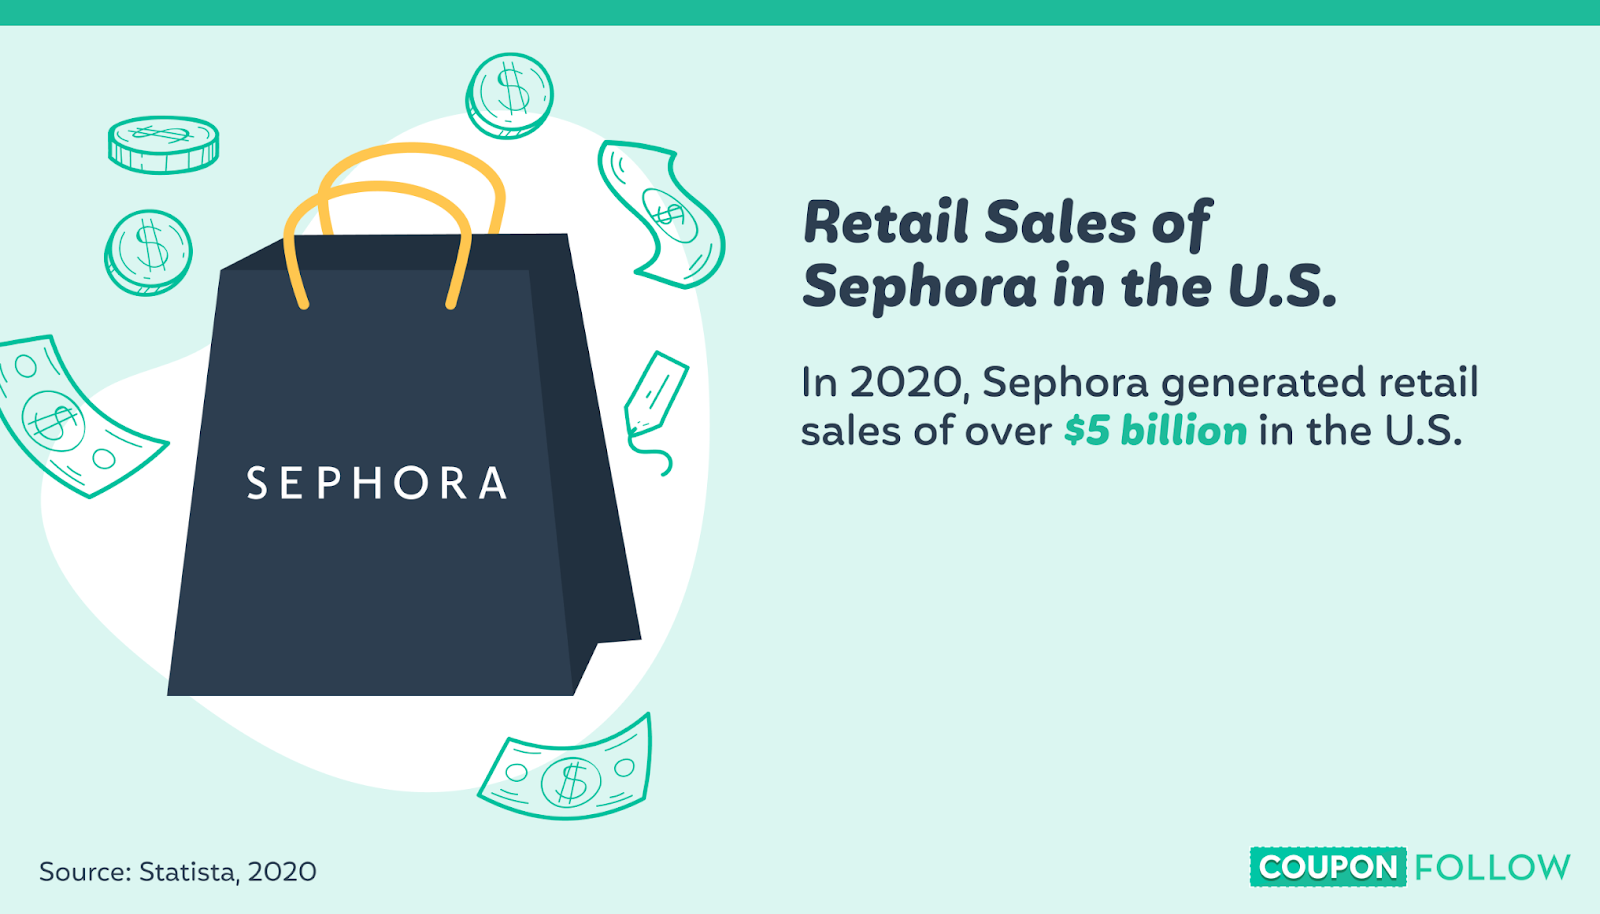 image showing the retail sales of sephora in the US in 2020